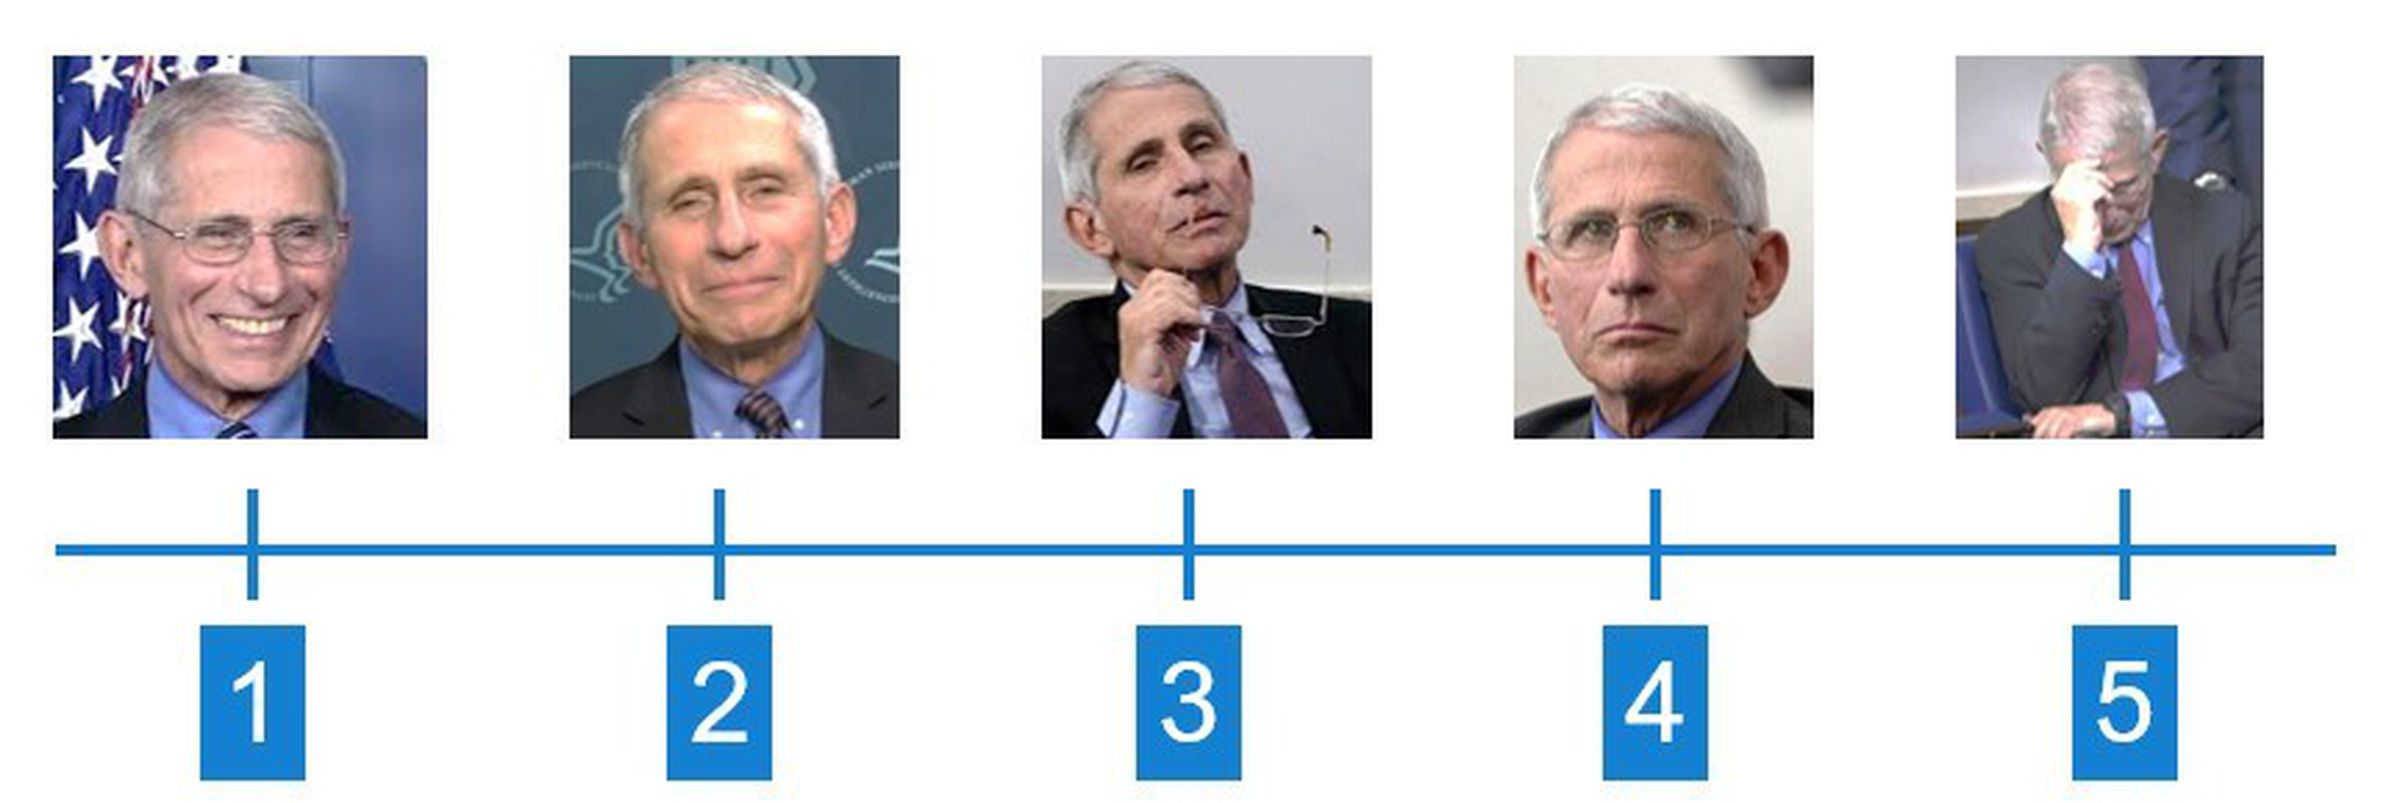 Dr. Fauci’s facial expressions say it all.